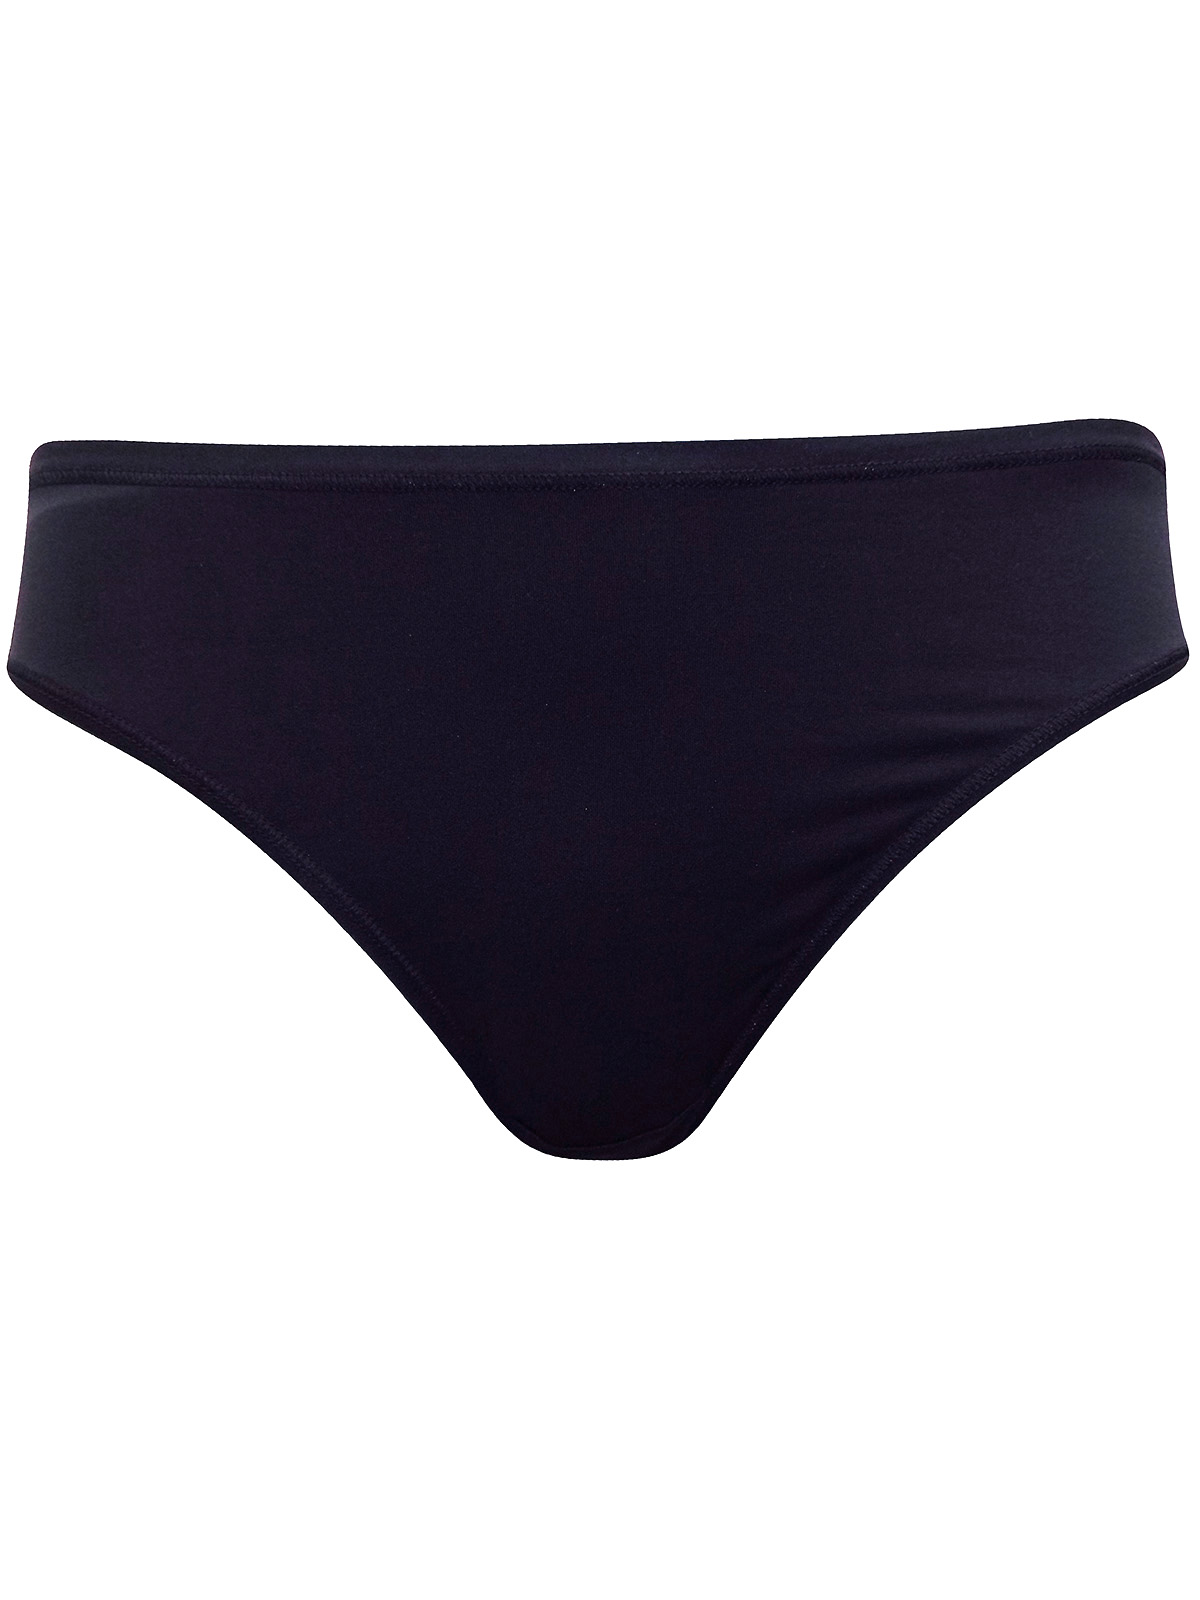 F&F Plain & Patented No VPL Silky Smooth High Leg Knickers Size 12 to 22  (041101